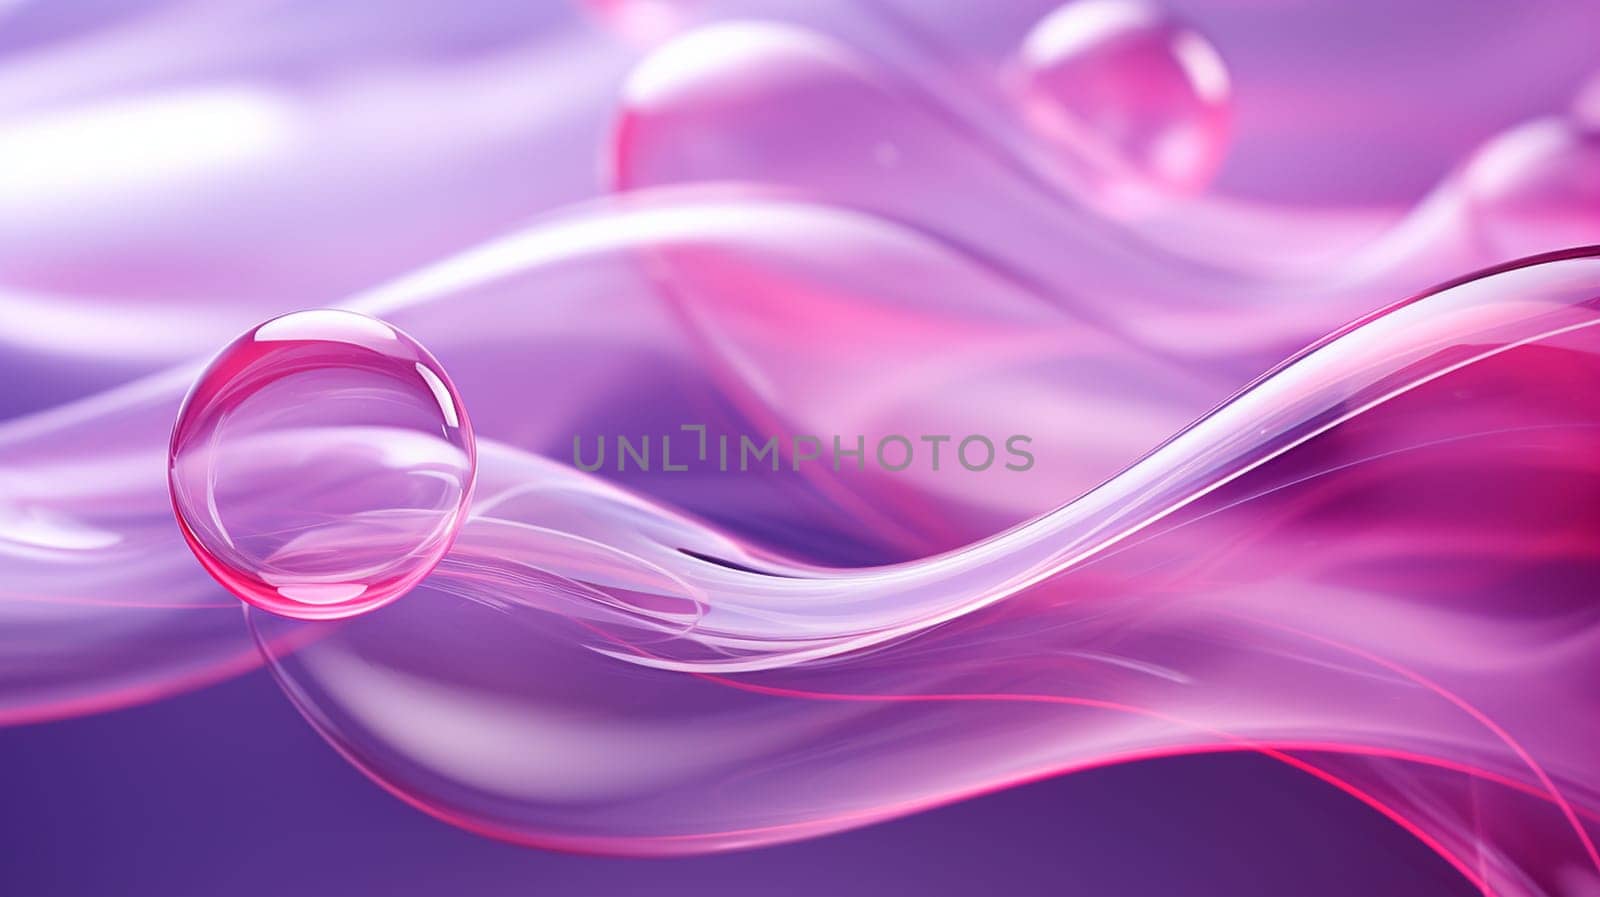 Beautiful abstract close up color pink white and purple soap bubbles background and wallpaper. High quality photo